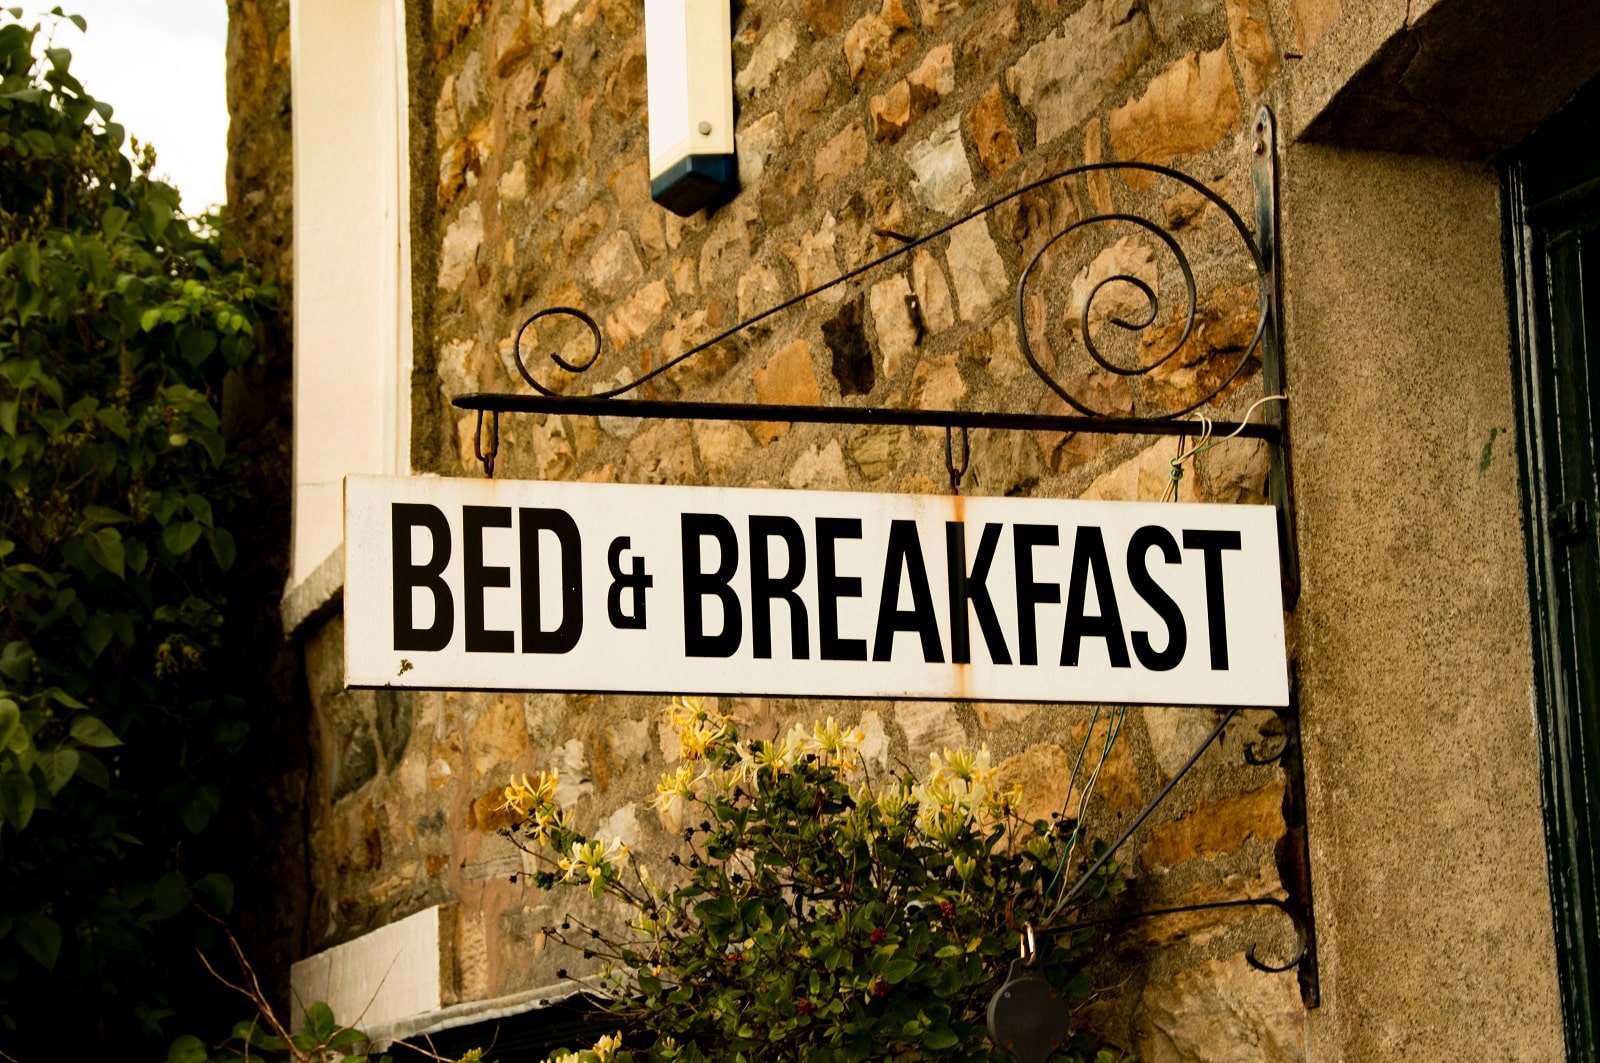 <p><span>Bed and breakfasts (B&Bs) offer charming and intimate accommodation options. Typically located in residential areas or in scenic locations, B&Bs provide a cozy, home-like atmosphere and the opportunity to interact with hosts and other guests. When choosing a B&B, consider the quality of the breakfast offered, the comfort of the rooms, and the overall ambiance of the property. B&Bs are ideal for travelers seeking a personal touch and the opportunity to experience local hospitality.</span> </p> <p><b>Insider’s Tip: </b><span>B&Bs can offer valuable local knowledge and a more personalized experience.</span></p>